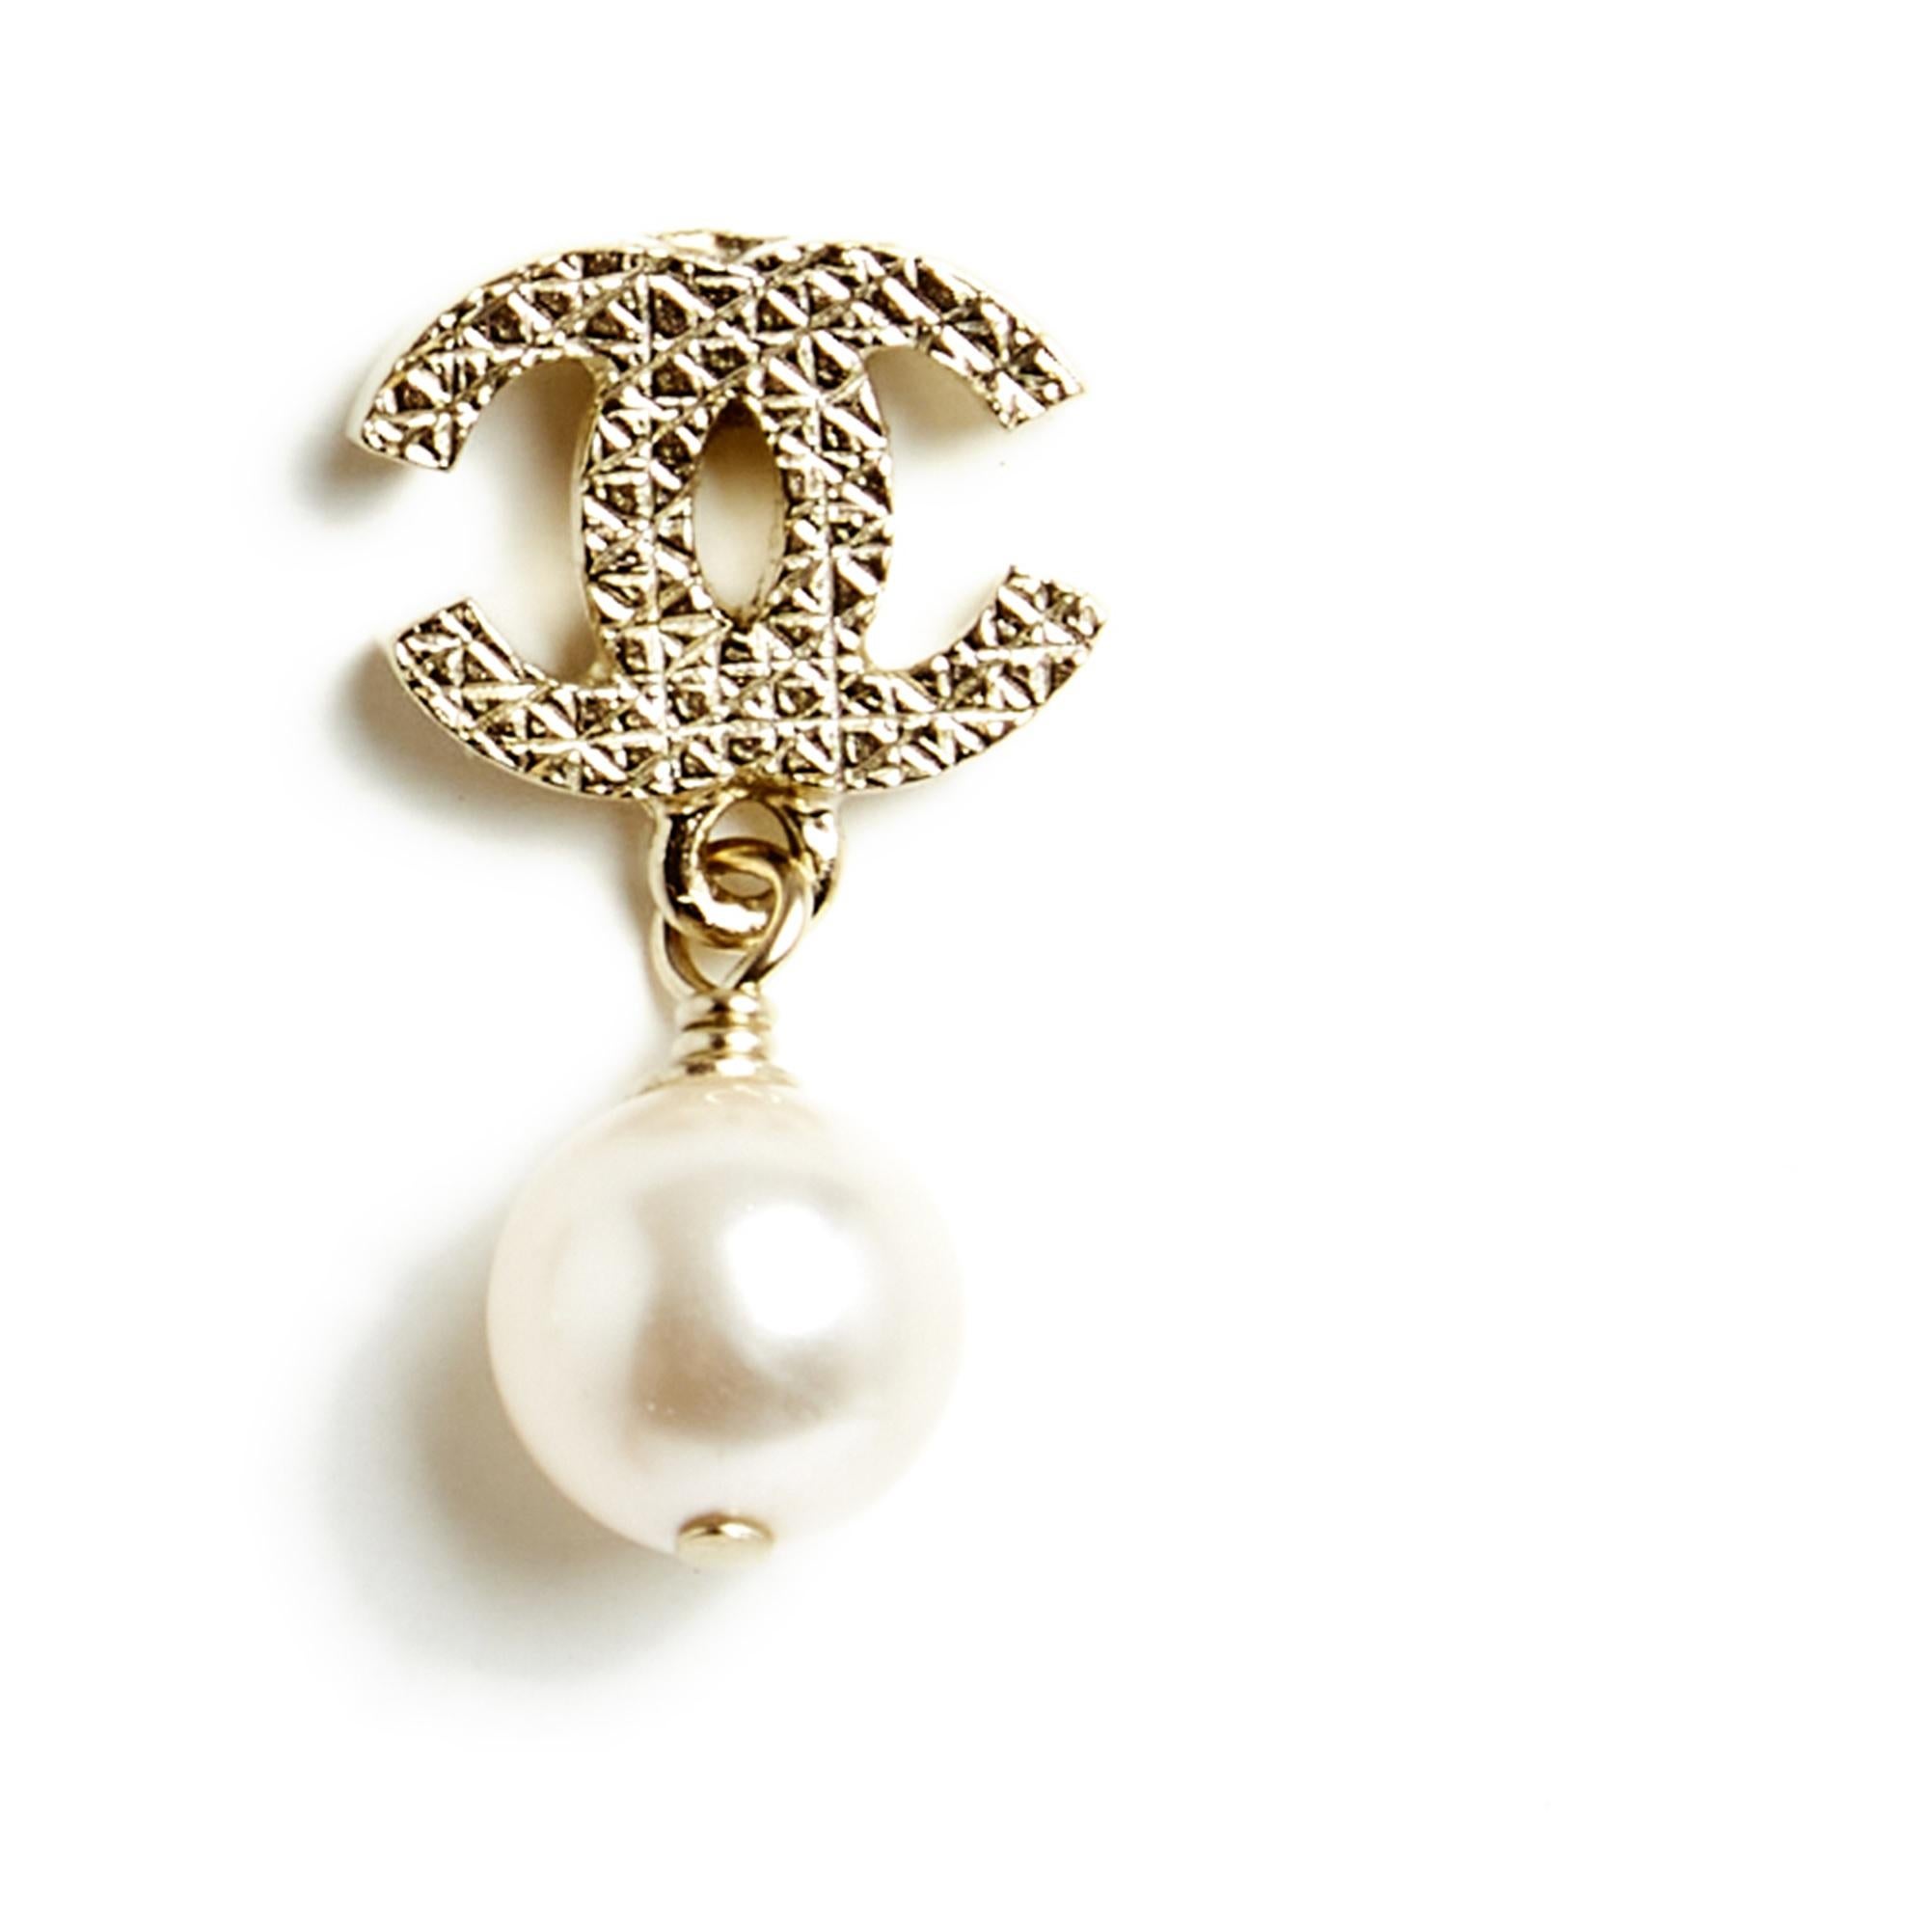 Chanel stud earrings composed of a Chanel CC logo in finely quilted gold metal and a round fancy pearl pendant. Width 1.15 cm x height 2.35 cm. The earrings are delivered without invoice or original packaging but they are in excellent condition,